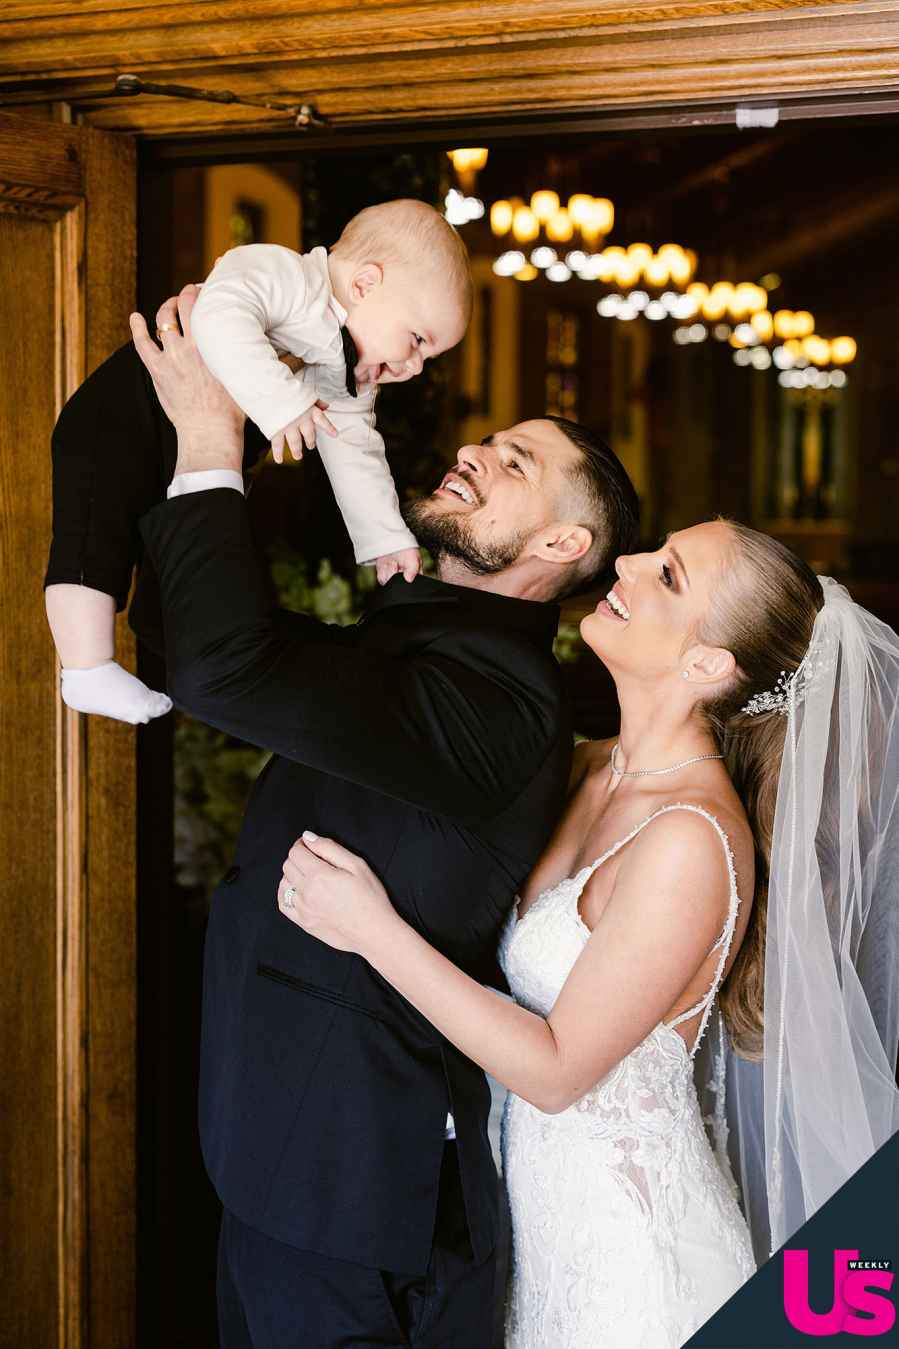 Holding Son The Challenge Zach Nichols and Jenna Compono Say Dream Wedding Was Worth the Wait